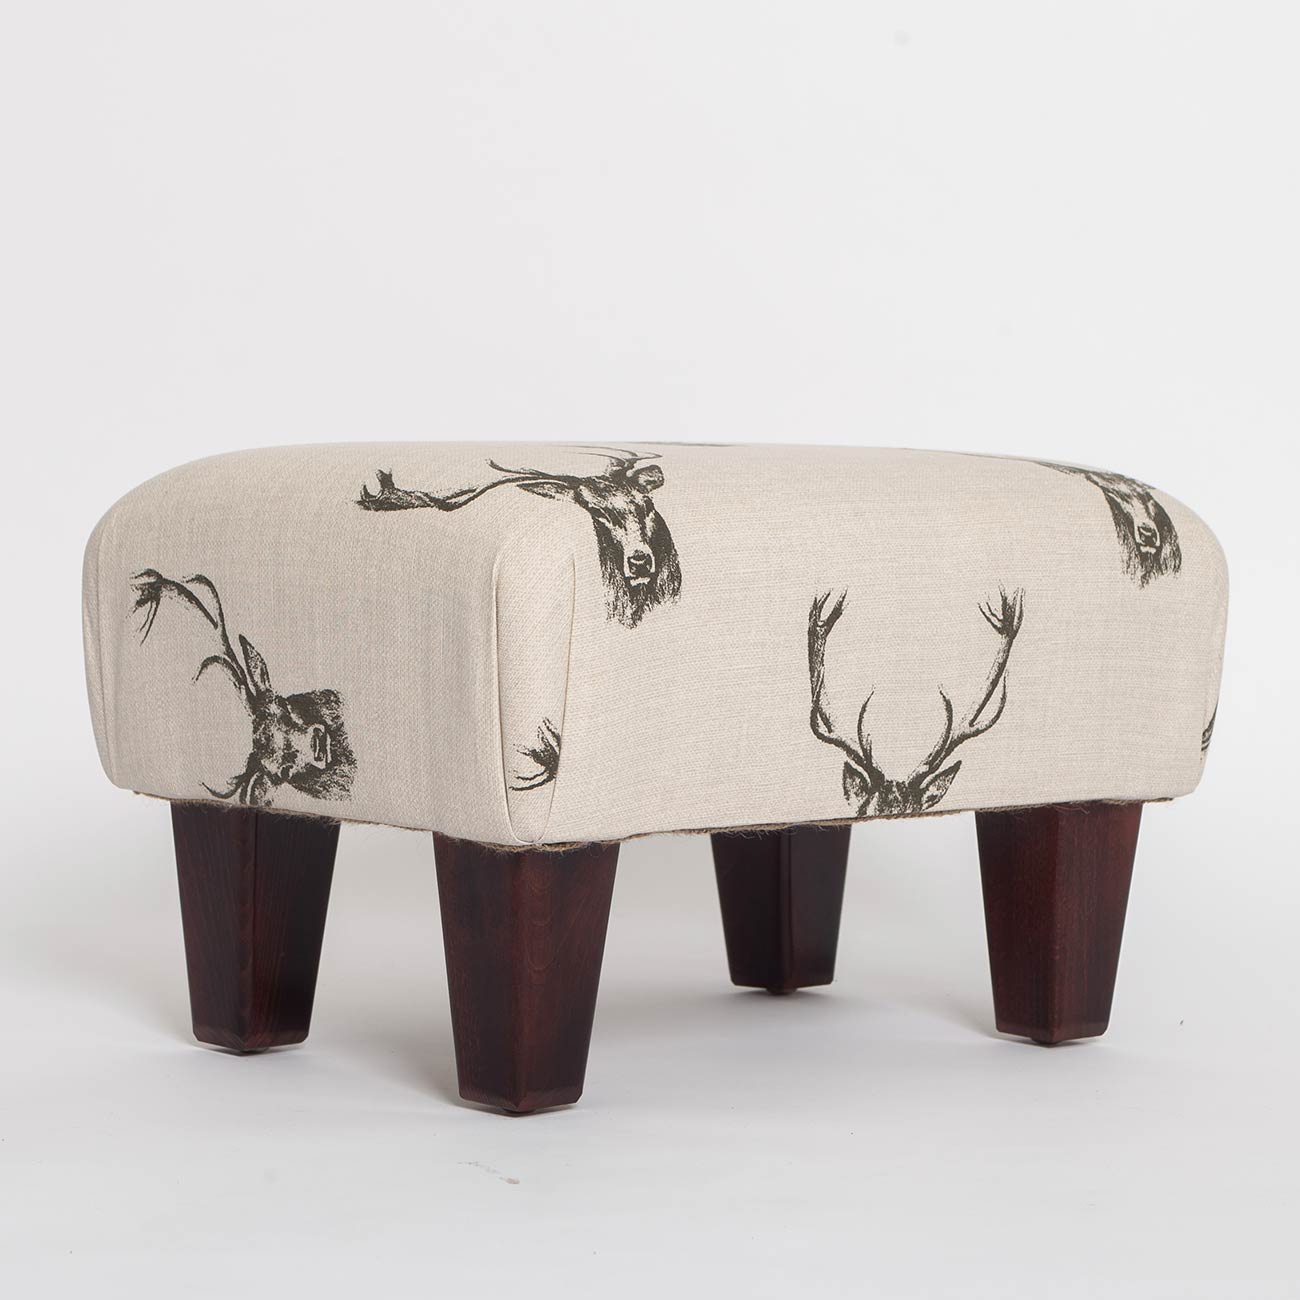 stag-head-footstool2 fabric from JLP